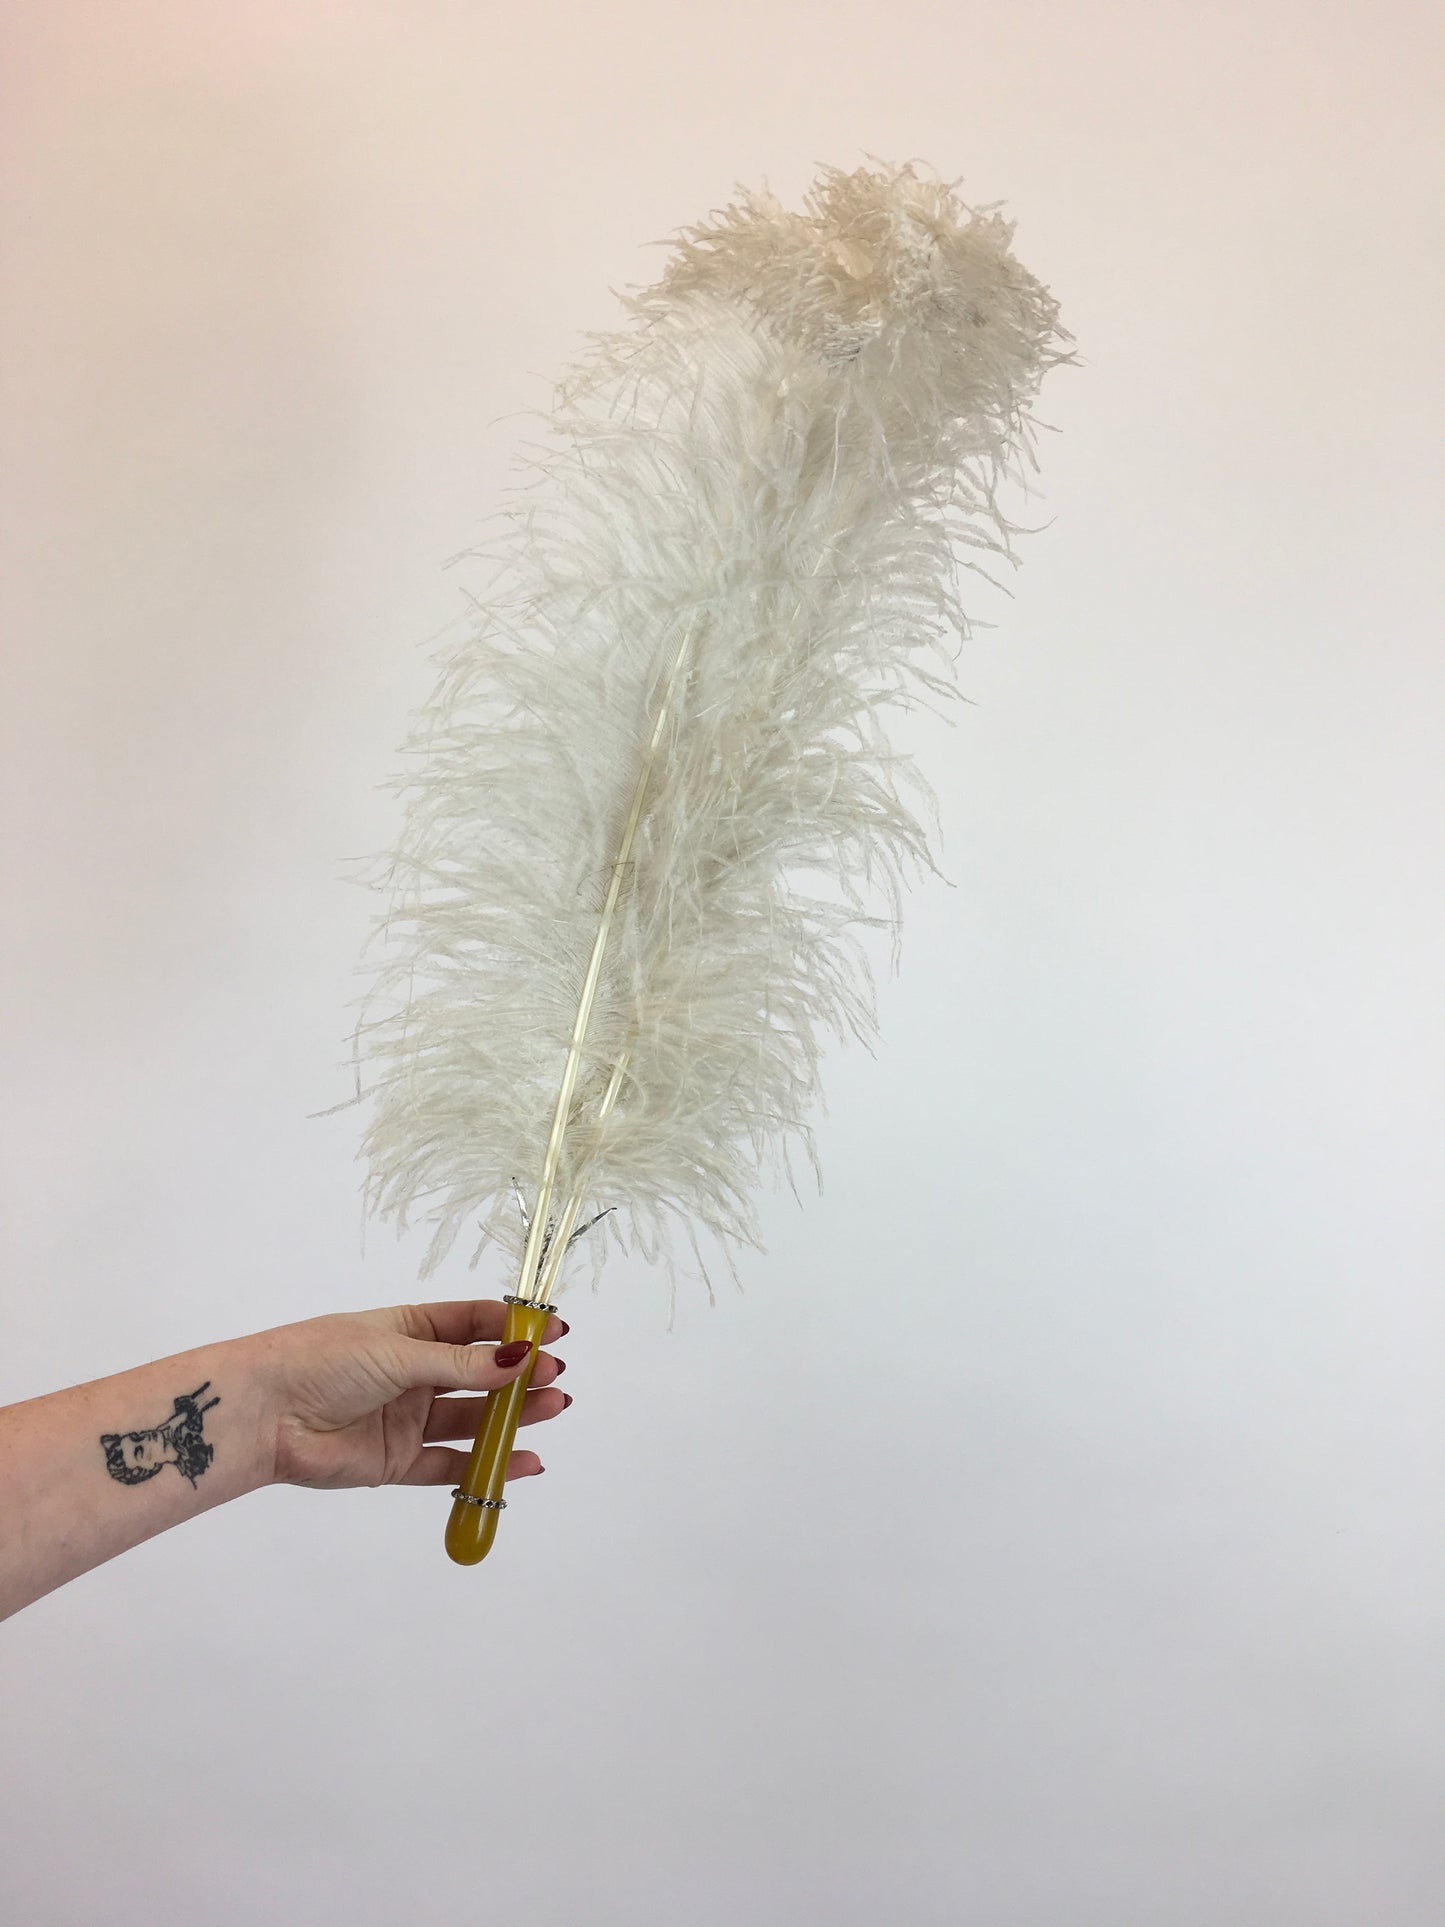 Original 1920's Fabulous Single Feather Plume with Encrusted Early Plastic Handle - Worn in 1926 To a Brides Evening Celebration